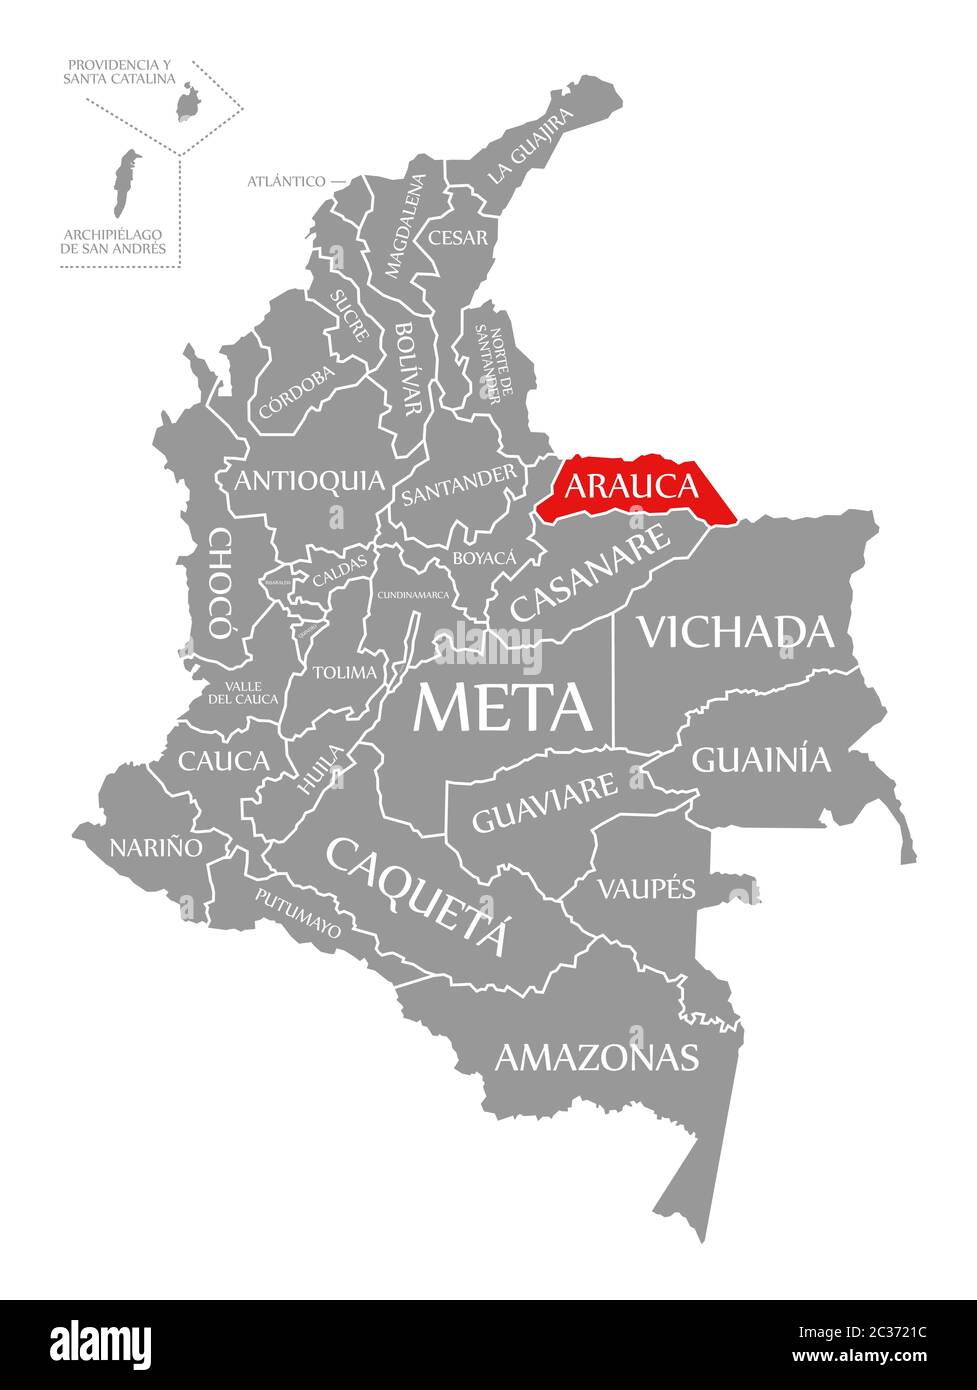 Arauca red highlighted in map of Colombia Stock Photo